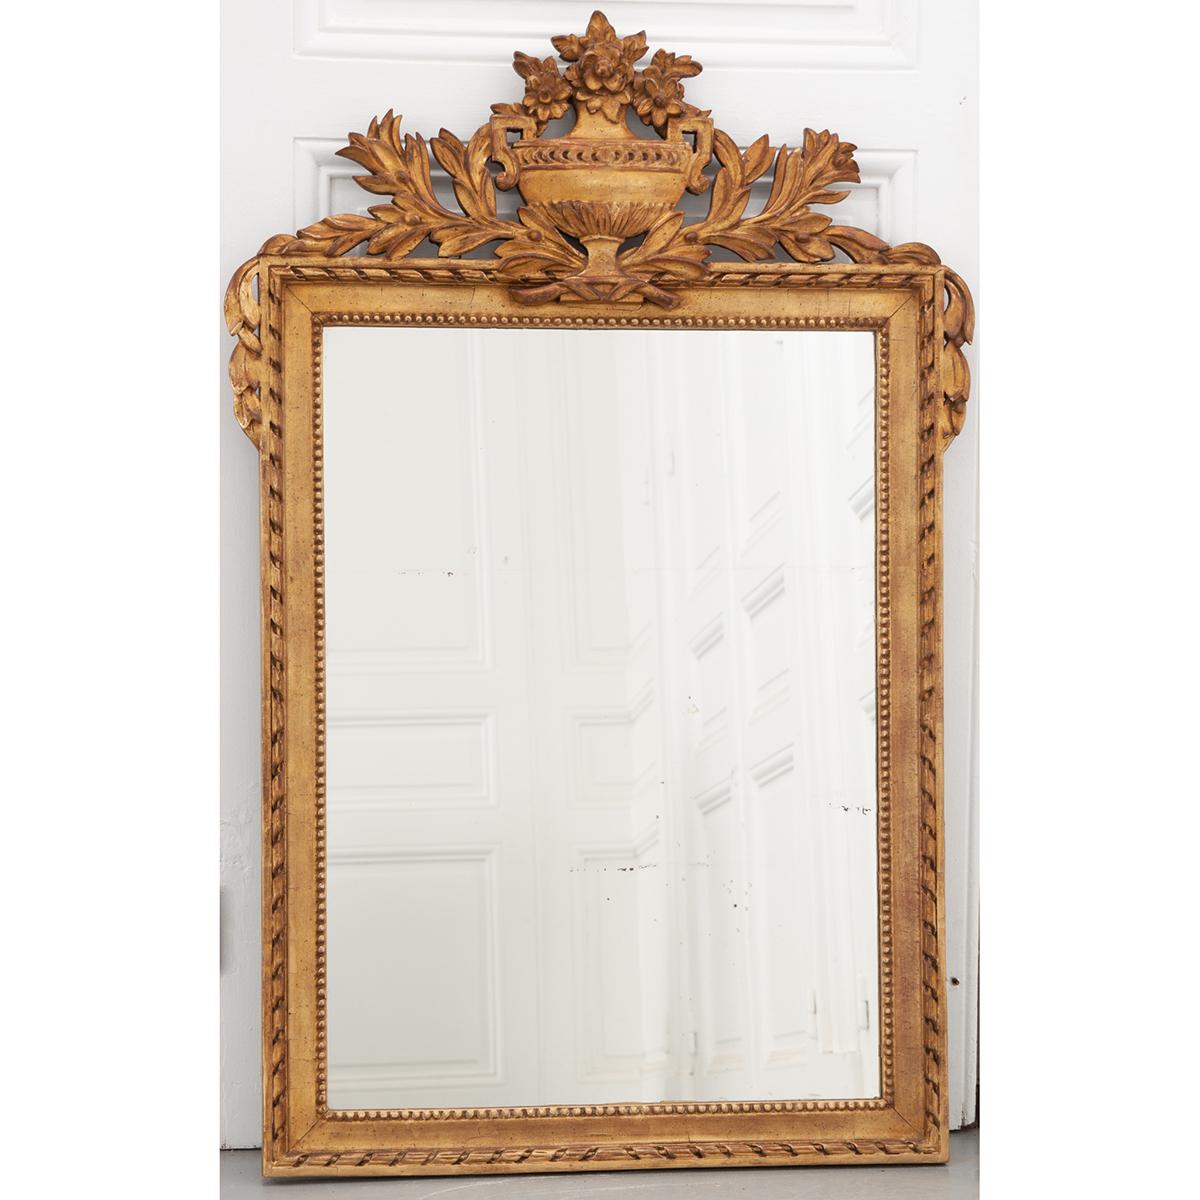 This French 19th century Louis XVI-style mirror has its original mirror plate with some aging. The crest at the top of the mirror has a floral and foliate covered urn. It is a nice petite size for a small area.